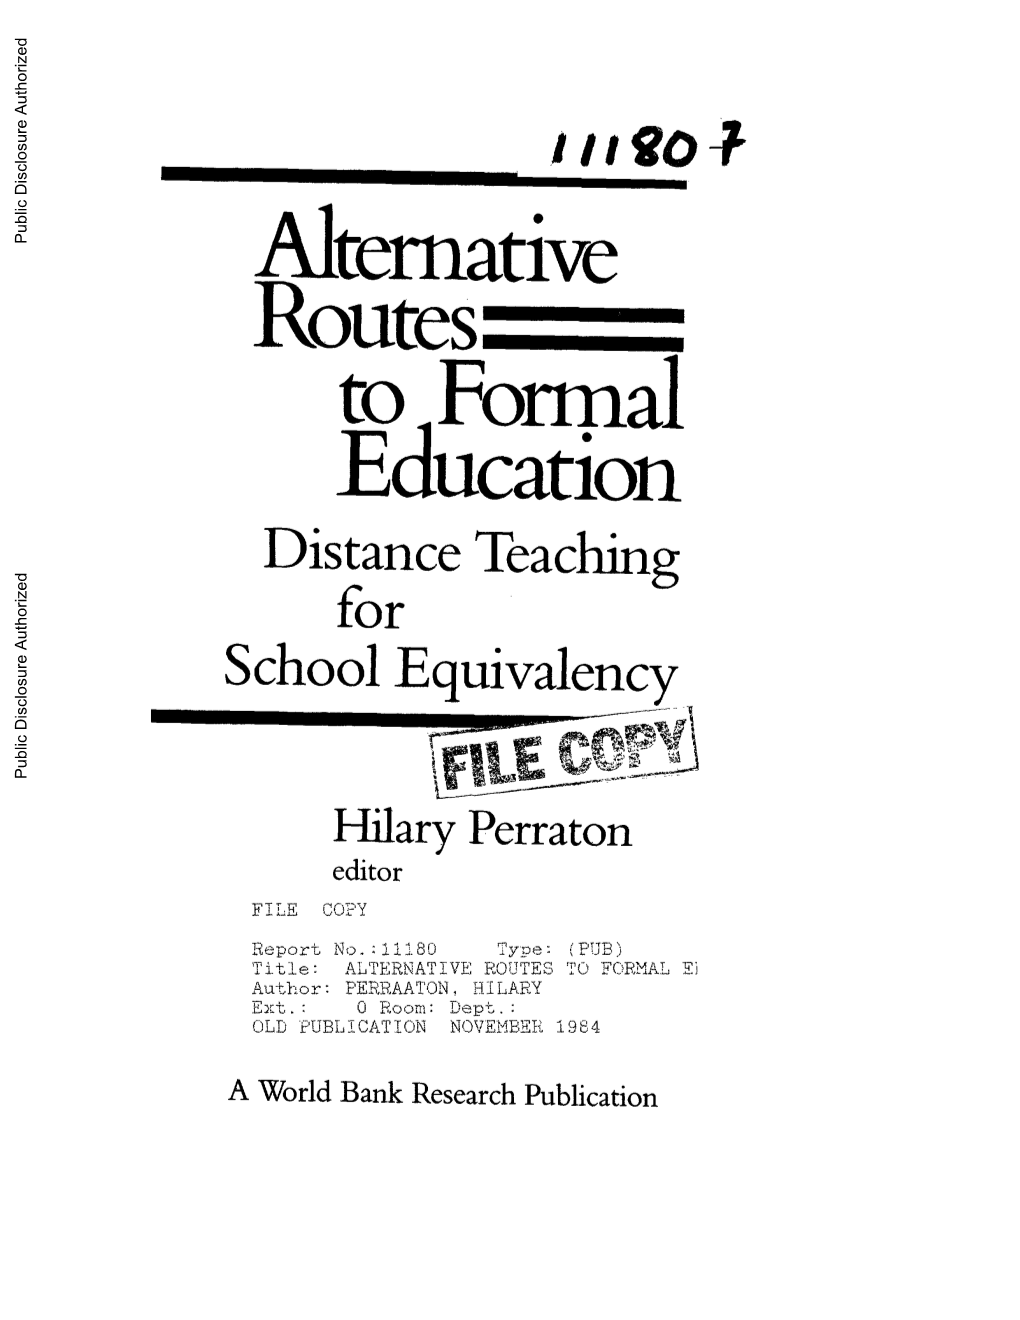 Alternative Routes to Foral Education